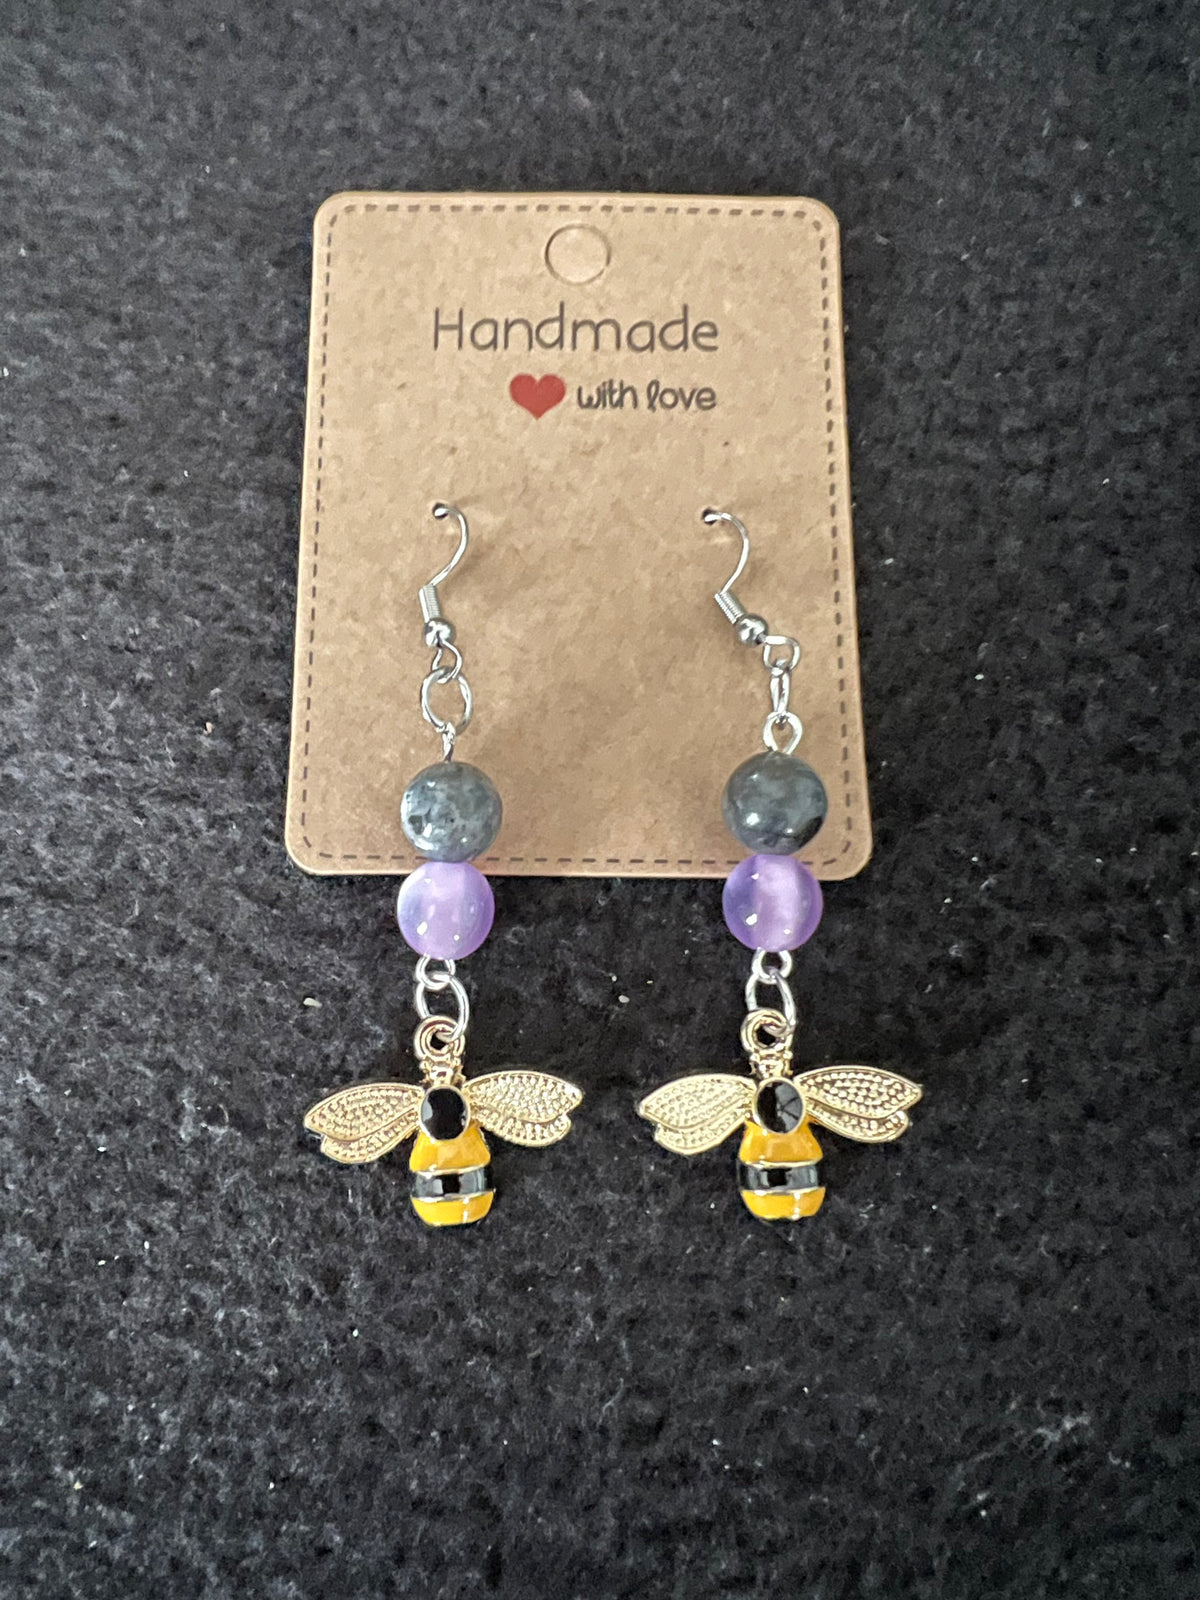 Jewelry - Metal Bees with Lavender and Grey beads